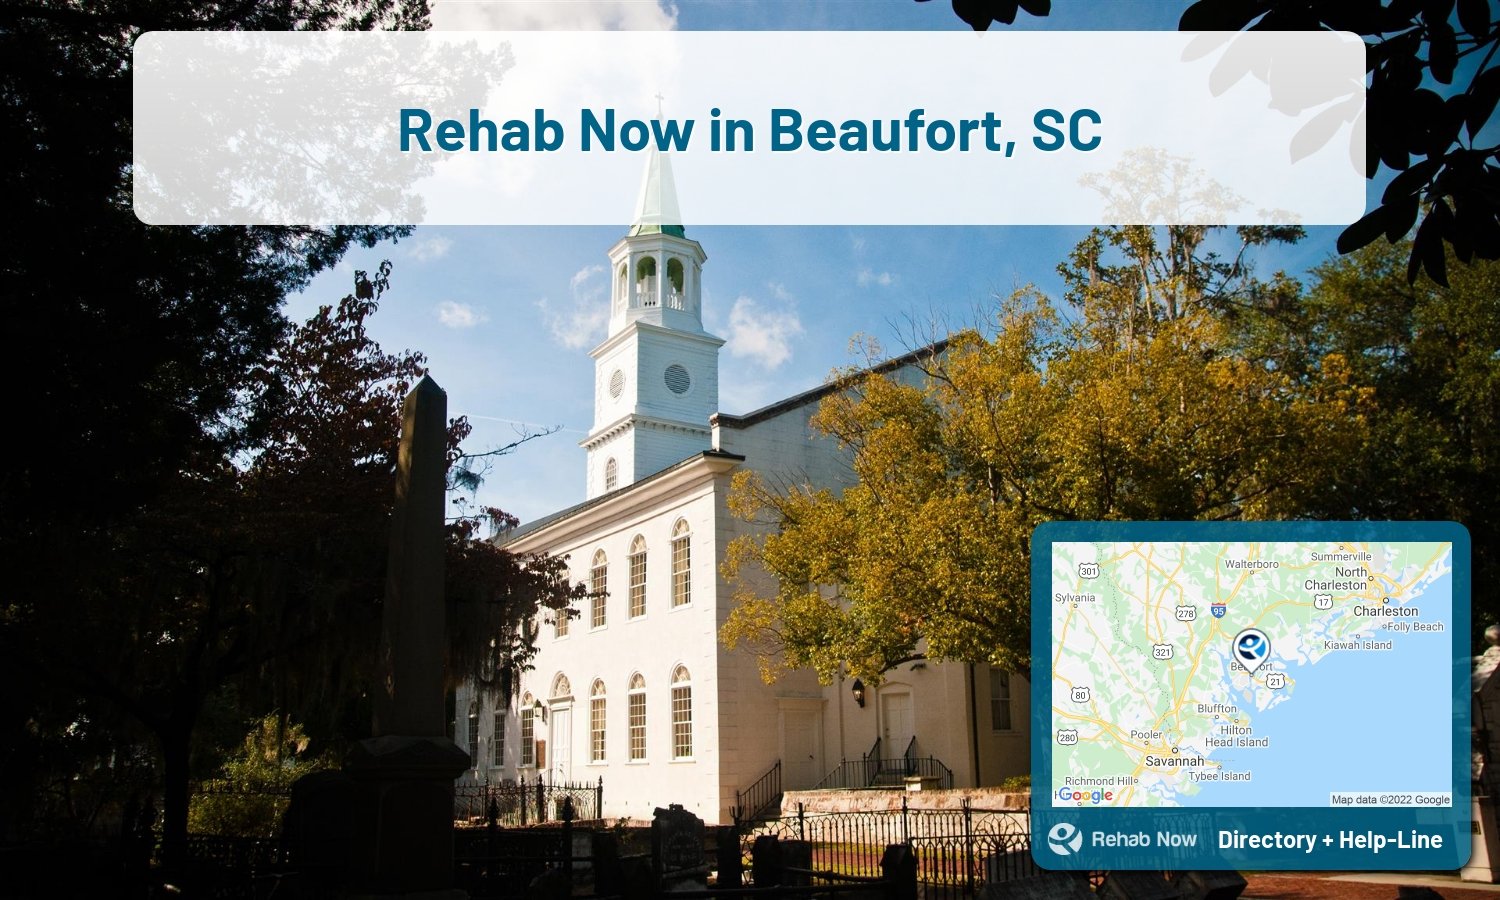 Beaufort, SC Treatment Centers. Find drug rehab in Beaufort, South Carolina, or detox and treatment programs. Get the right help now!